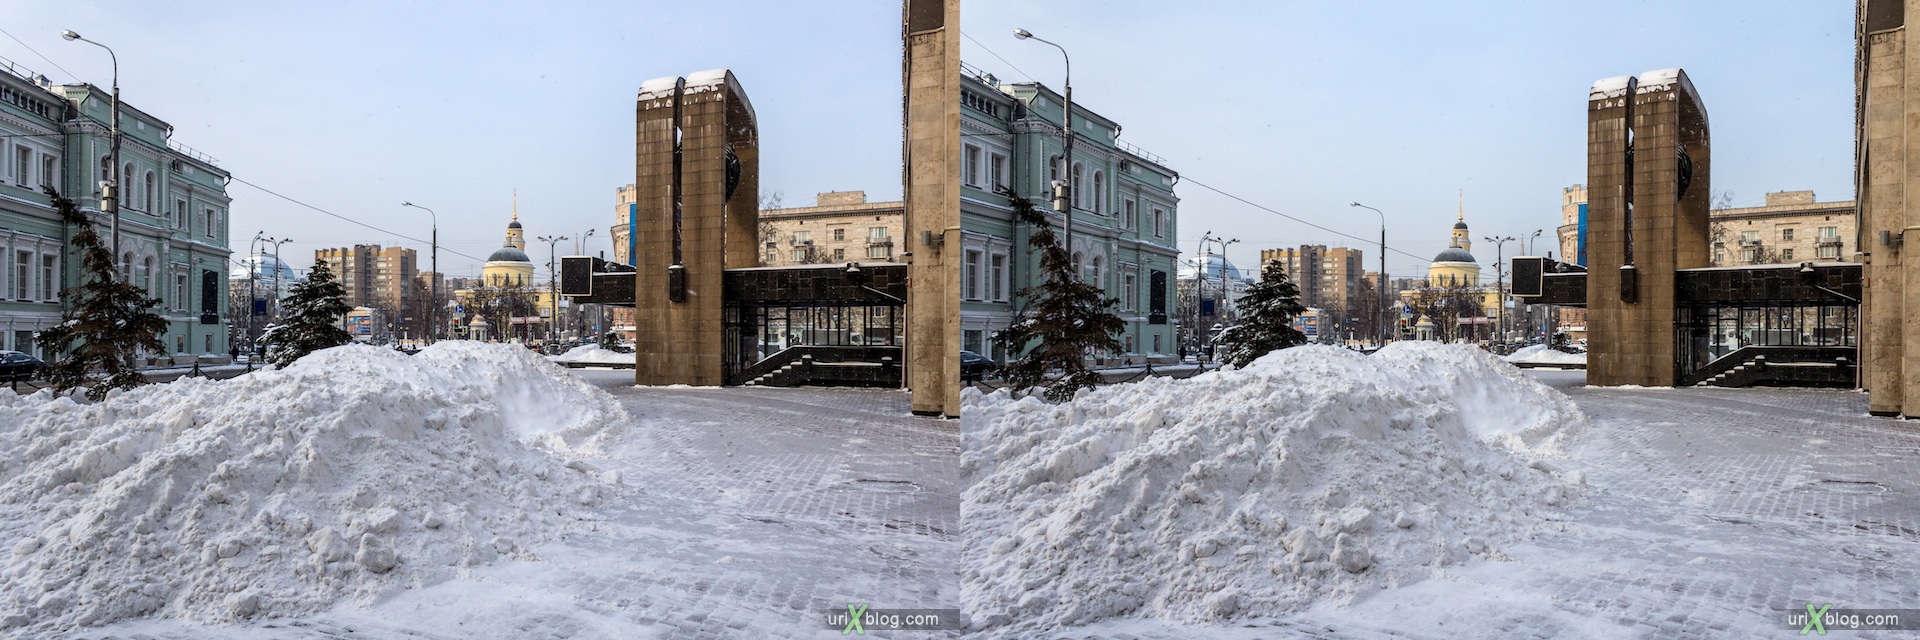 2013, Moscow, Nikitsky Gate Square, ITAR-TASS, Theater at Nikitsky Gate, snow, winter, city, Russia, 3D, stereo pair, cross-eyed, crossview, cross view stereo pair